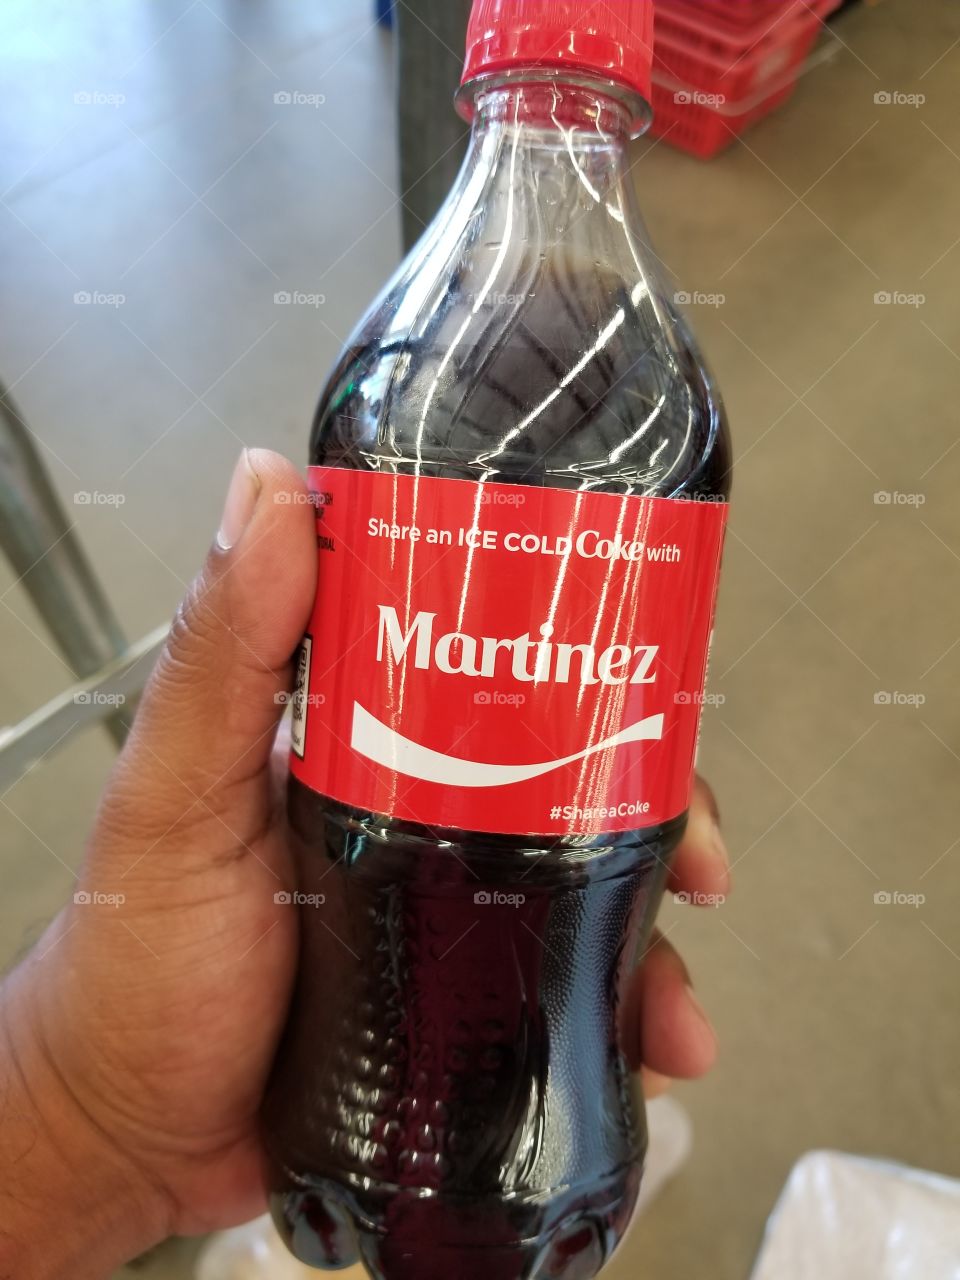 finding your last name on a coke bottle during the "share a coke " promotion for coca cola